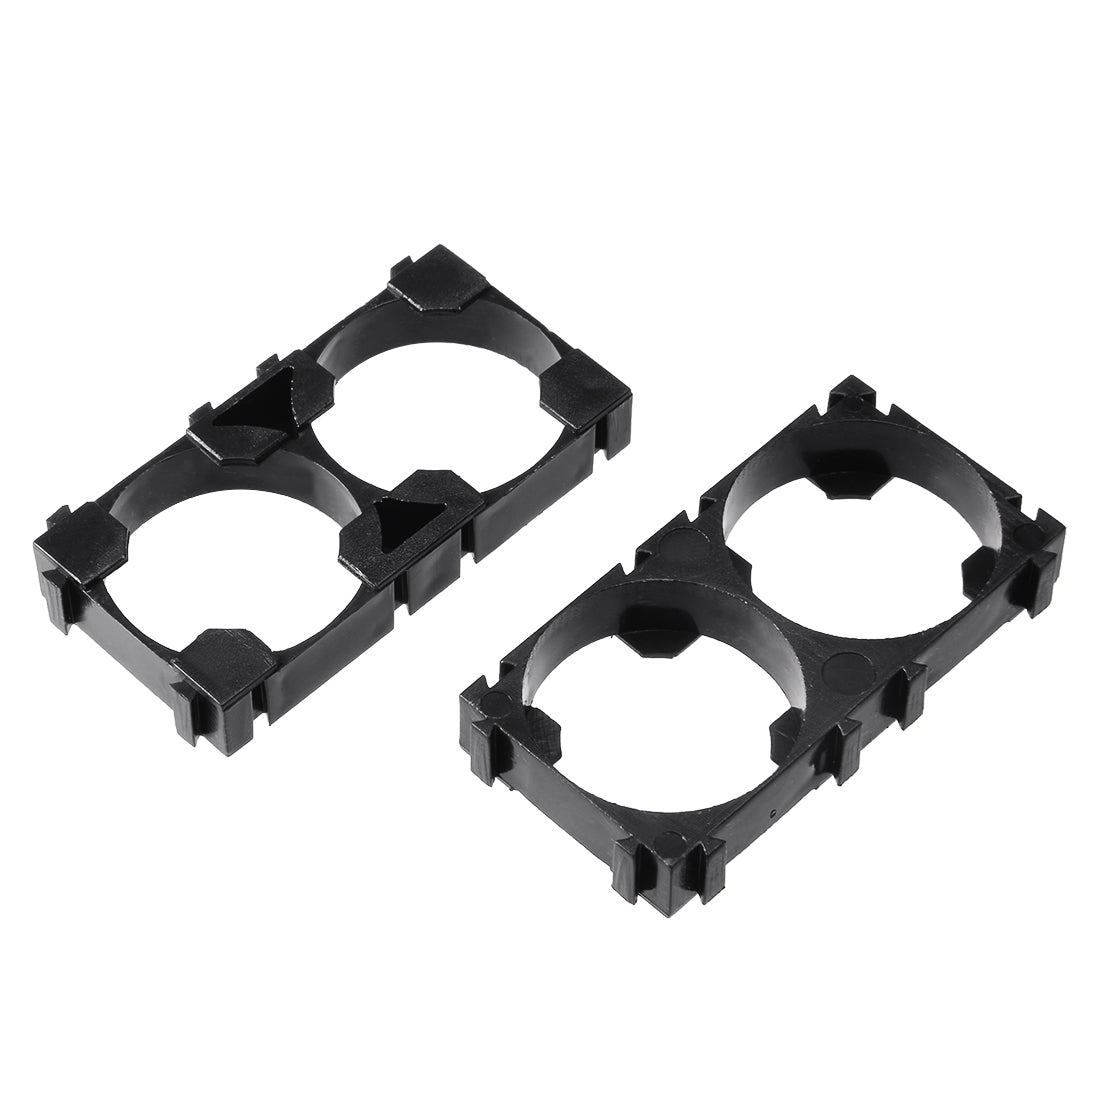 uxcell Uxcell 15 Pcs 26650 Lithium Ion Cell Double Battery Holder Bracket for DIY Battery Pack